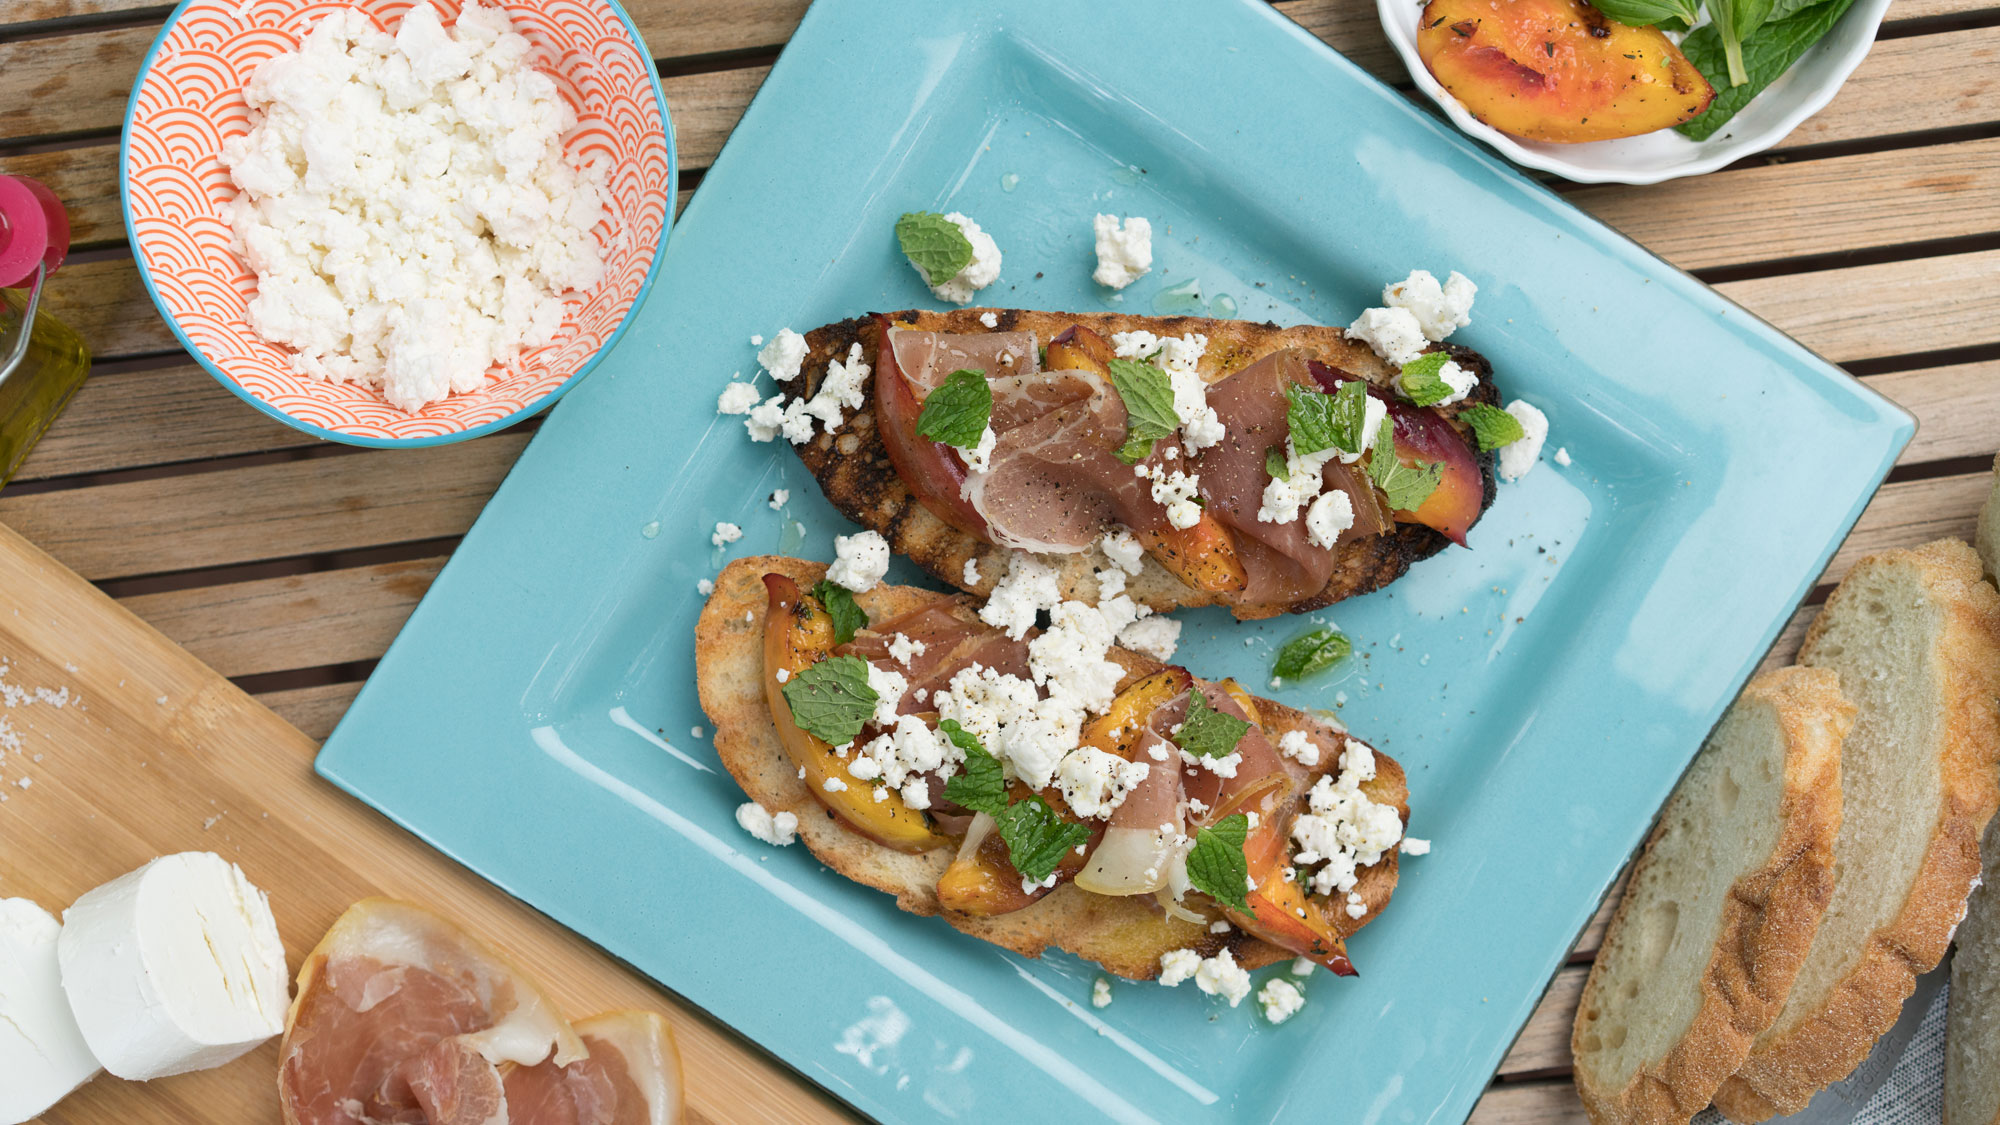 Beat the Heat: Prosciutto and Goat Cheese Summer Toast Recipe